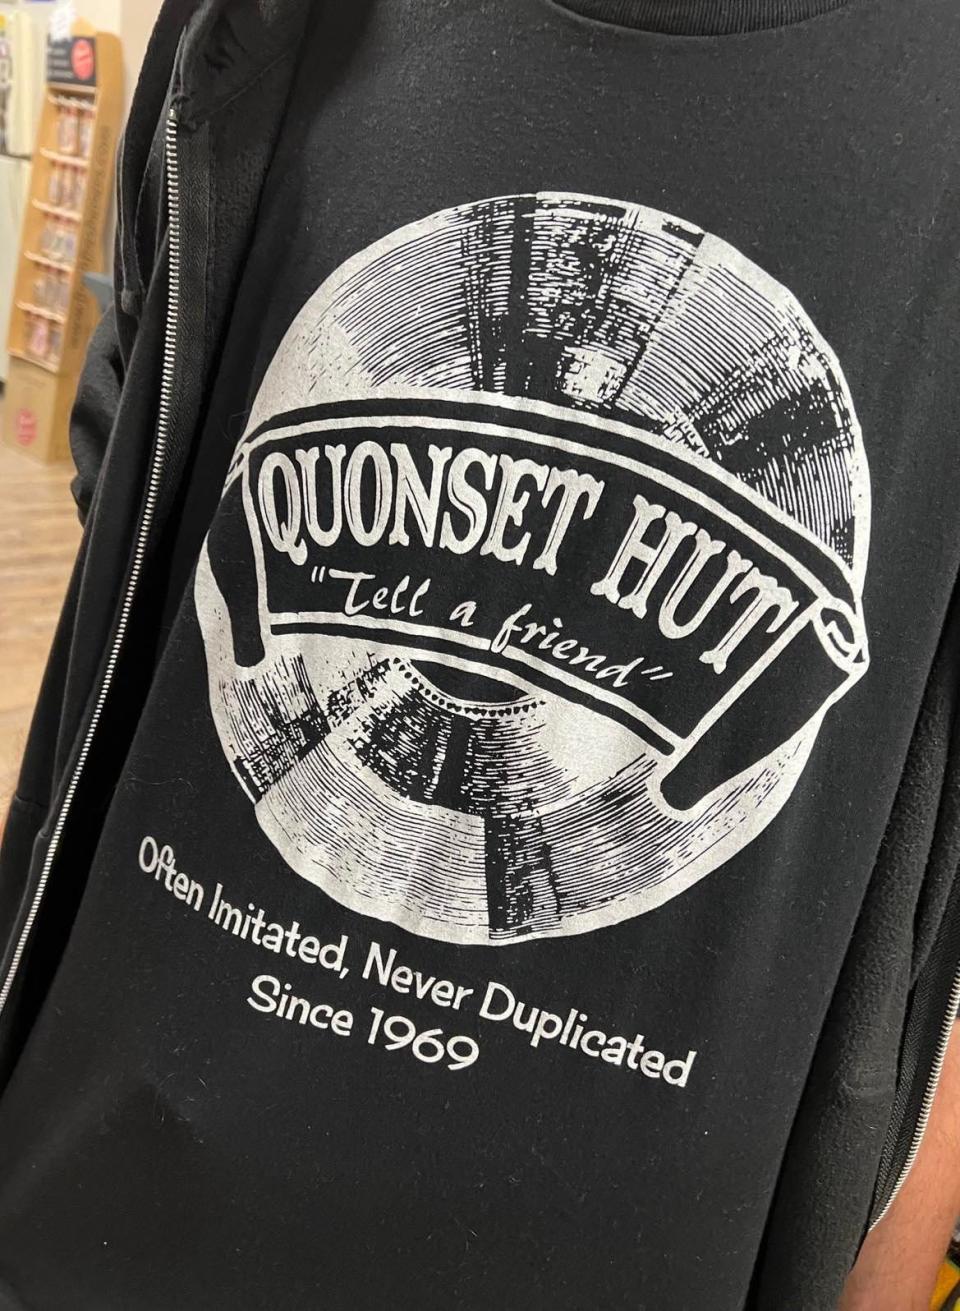 Quonset Hut, which opened in 1969 as a hippie boutique, has evolved as a business in Canton. Now it sells vinyl records, skateboards, pickleball and disc golf equipment, clothing, jewelry, metaphysical items and more. There's also a smoke shop. Quonset Hut is holding a grand opening event 11 a.m. to 3 p.m. Saturday at its new multi-purpose space next door on Cleveland Avenue NW.